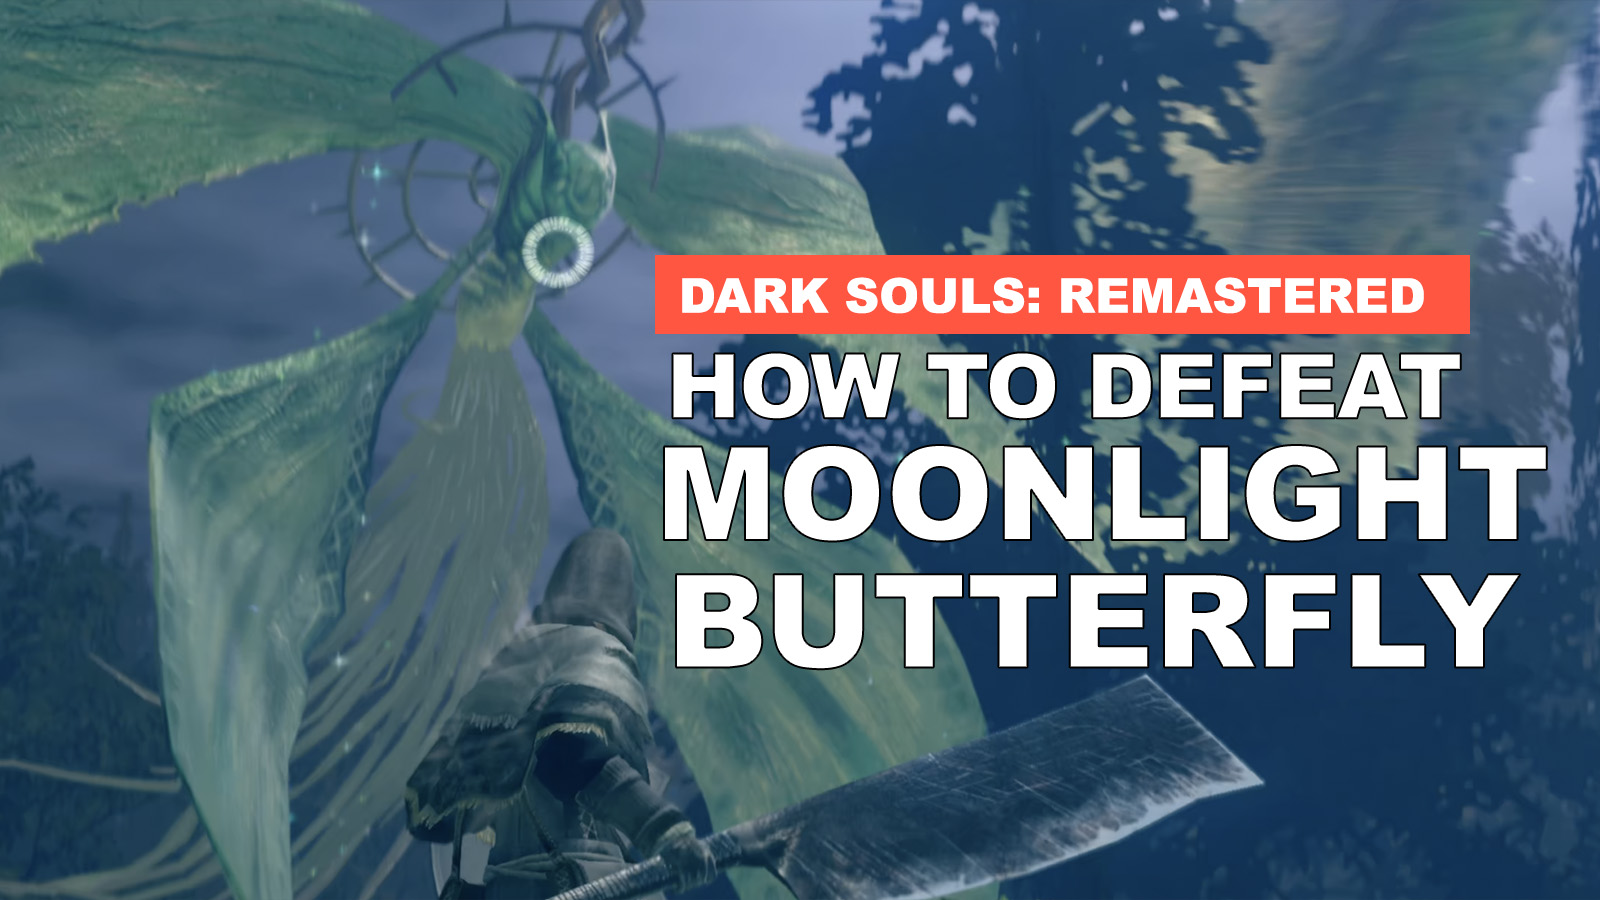 How To Defeat The Moonlight Butterfly In Dark Souls: Remastered